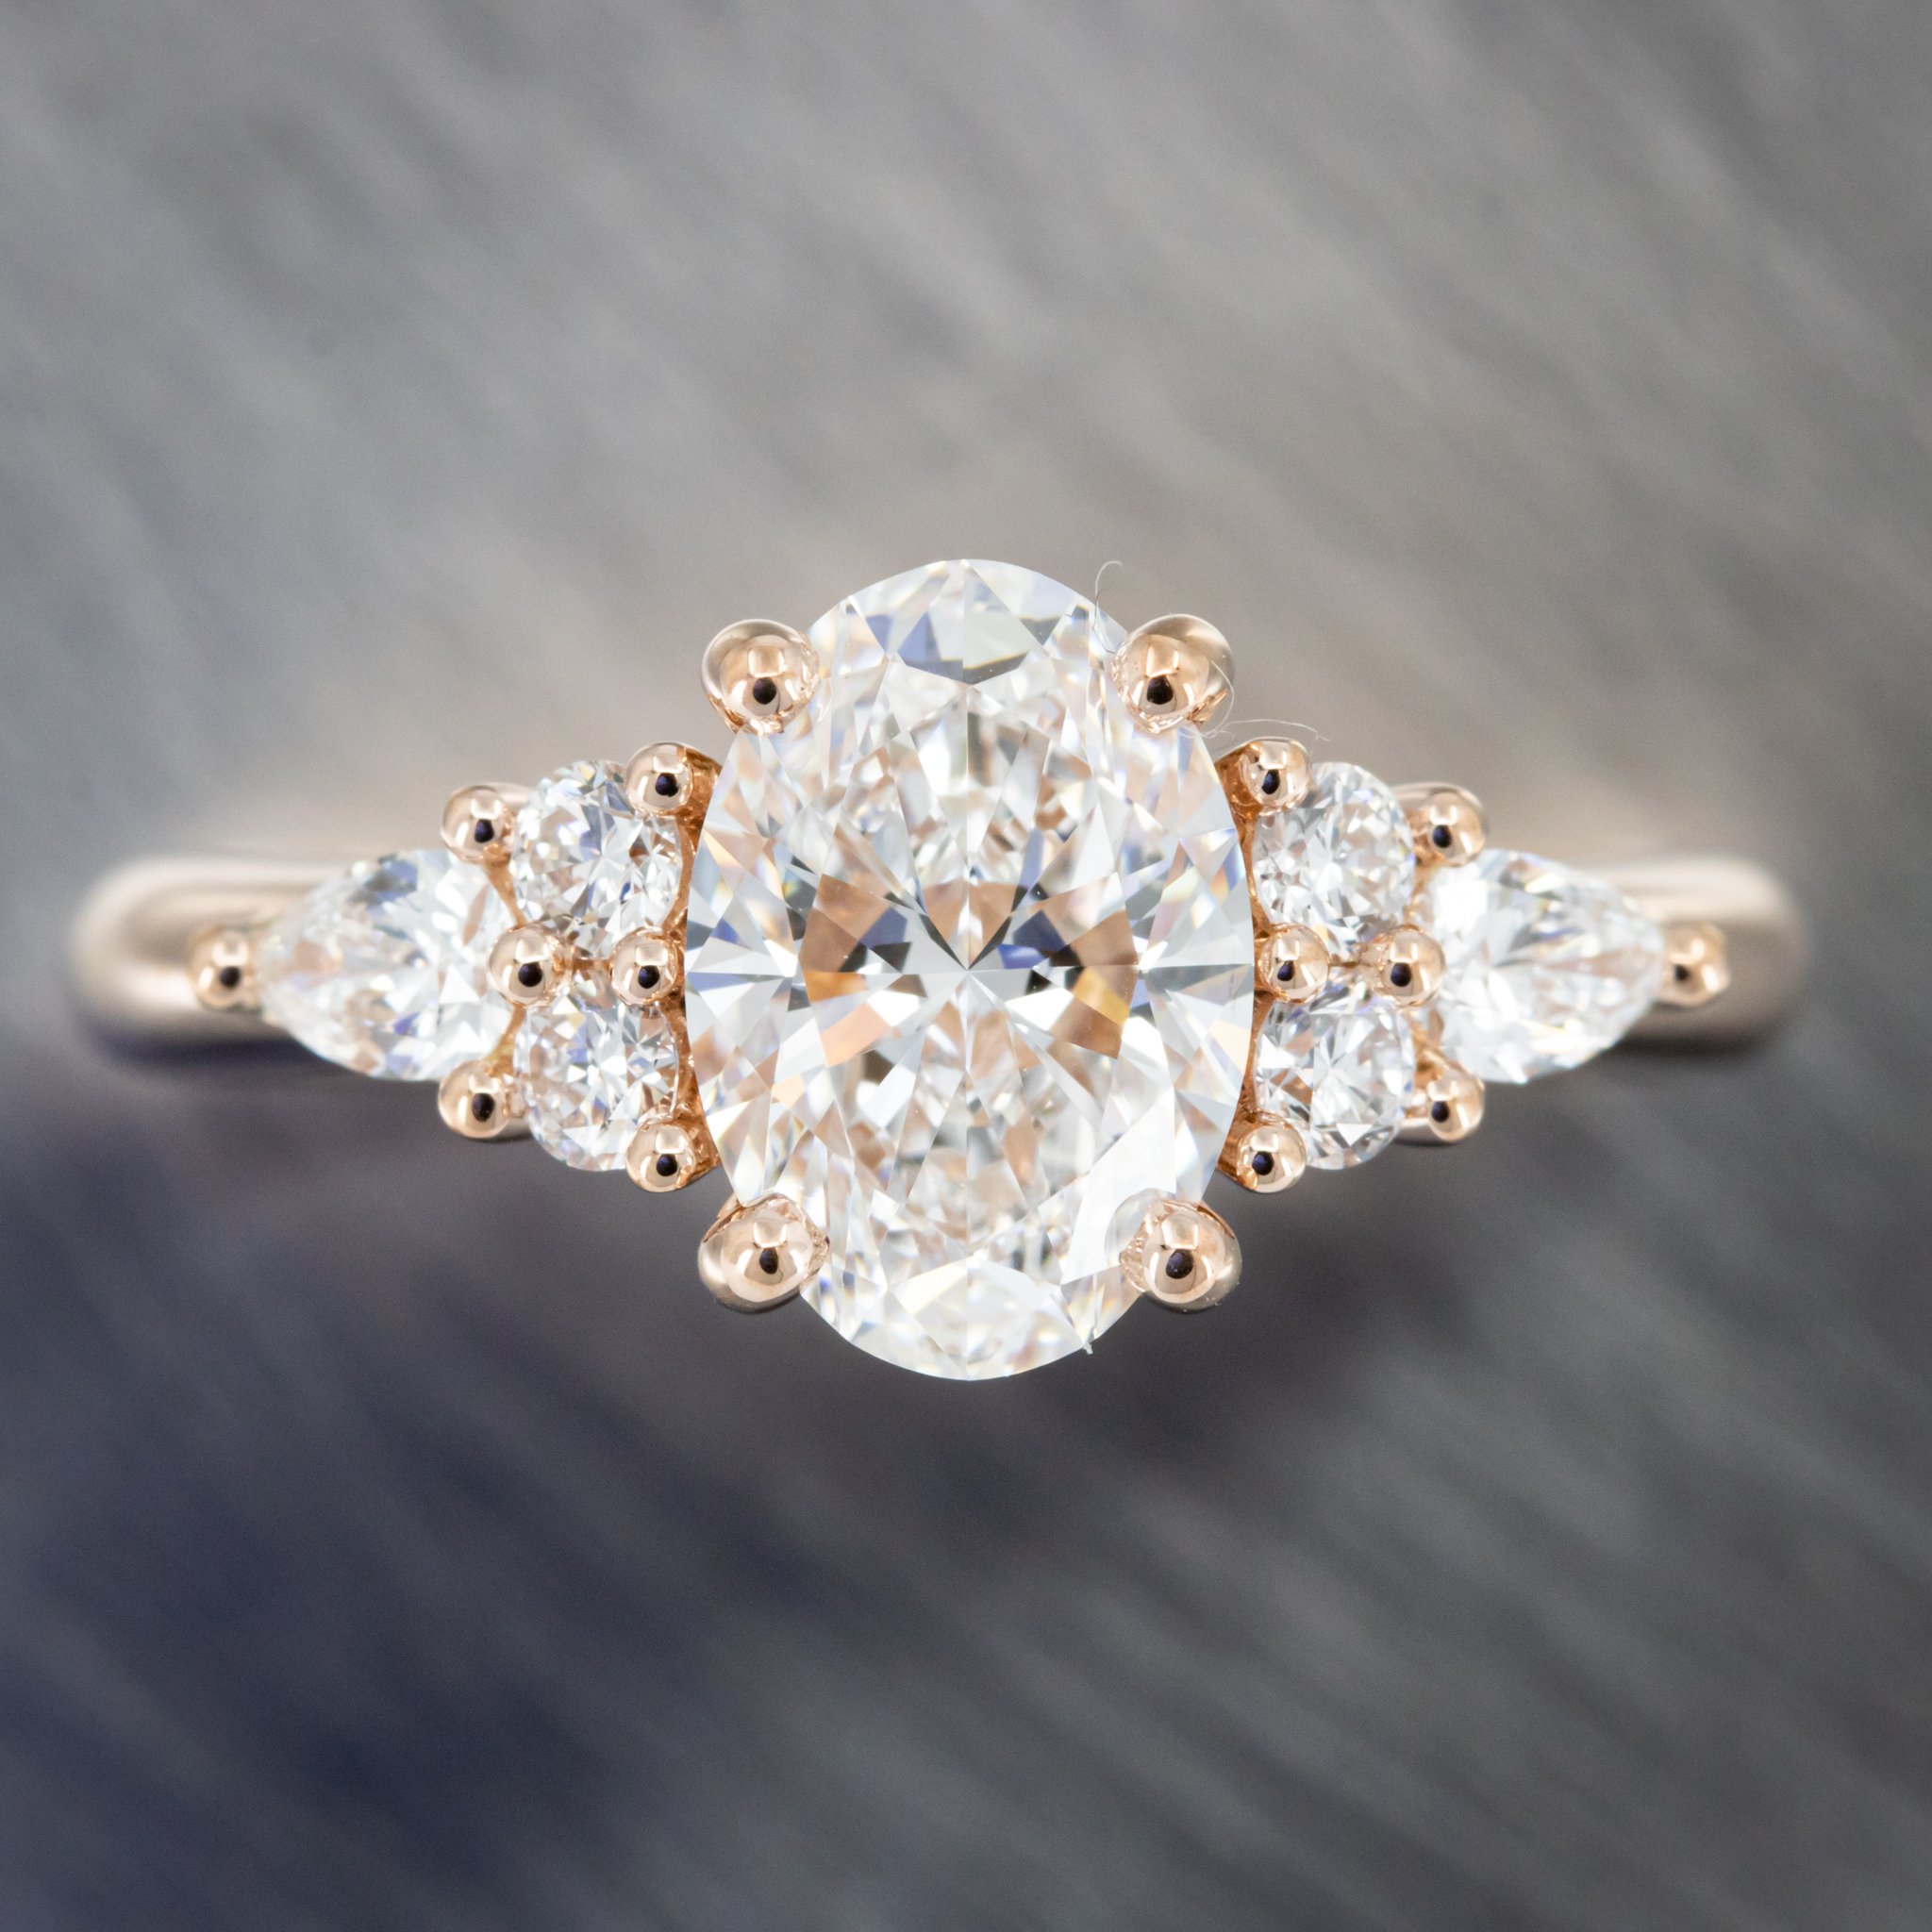 Custom Engagement Ring in 14k Rose Gold with an Oval Brilliant Cut Laboratory Grown Diamond in a Four Prong Setting with Two Round Brilliant Cut and One Pear Shape Laboratory Grown Diamond on Either Side of the Center Stone. Considering custom? Check